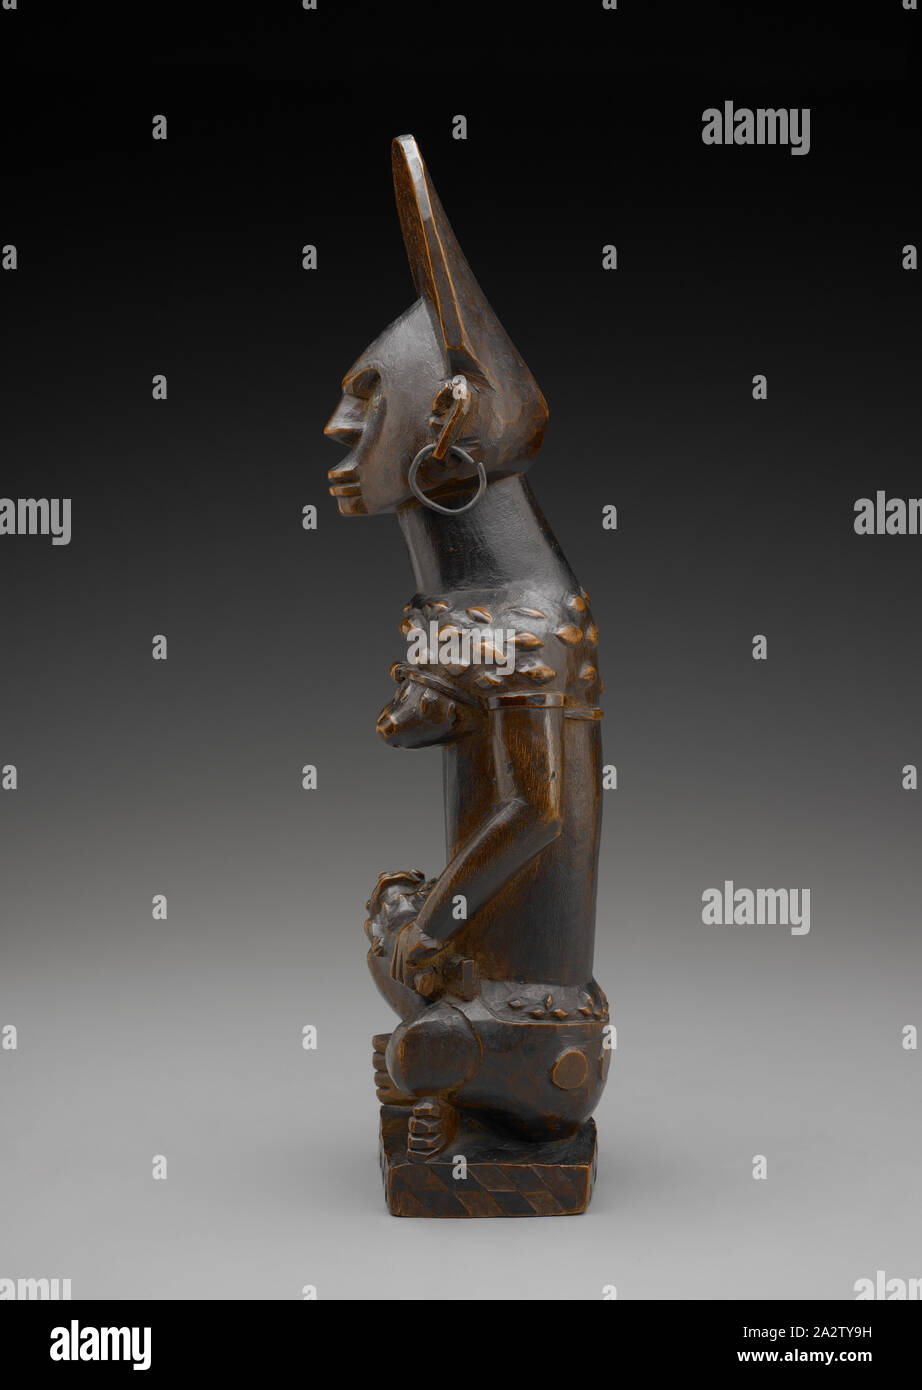 female figure with child (Phemba), Yombe people, late 19th century - early 20th century, wood, brass, glass, 13-1/2 x 4 x 3 in., African Art Stock Photo